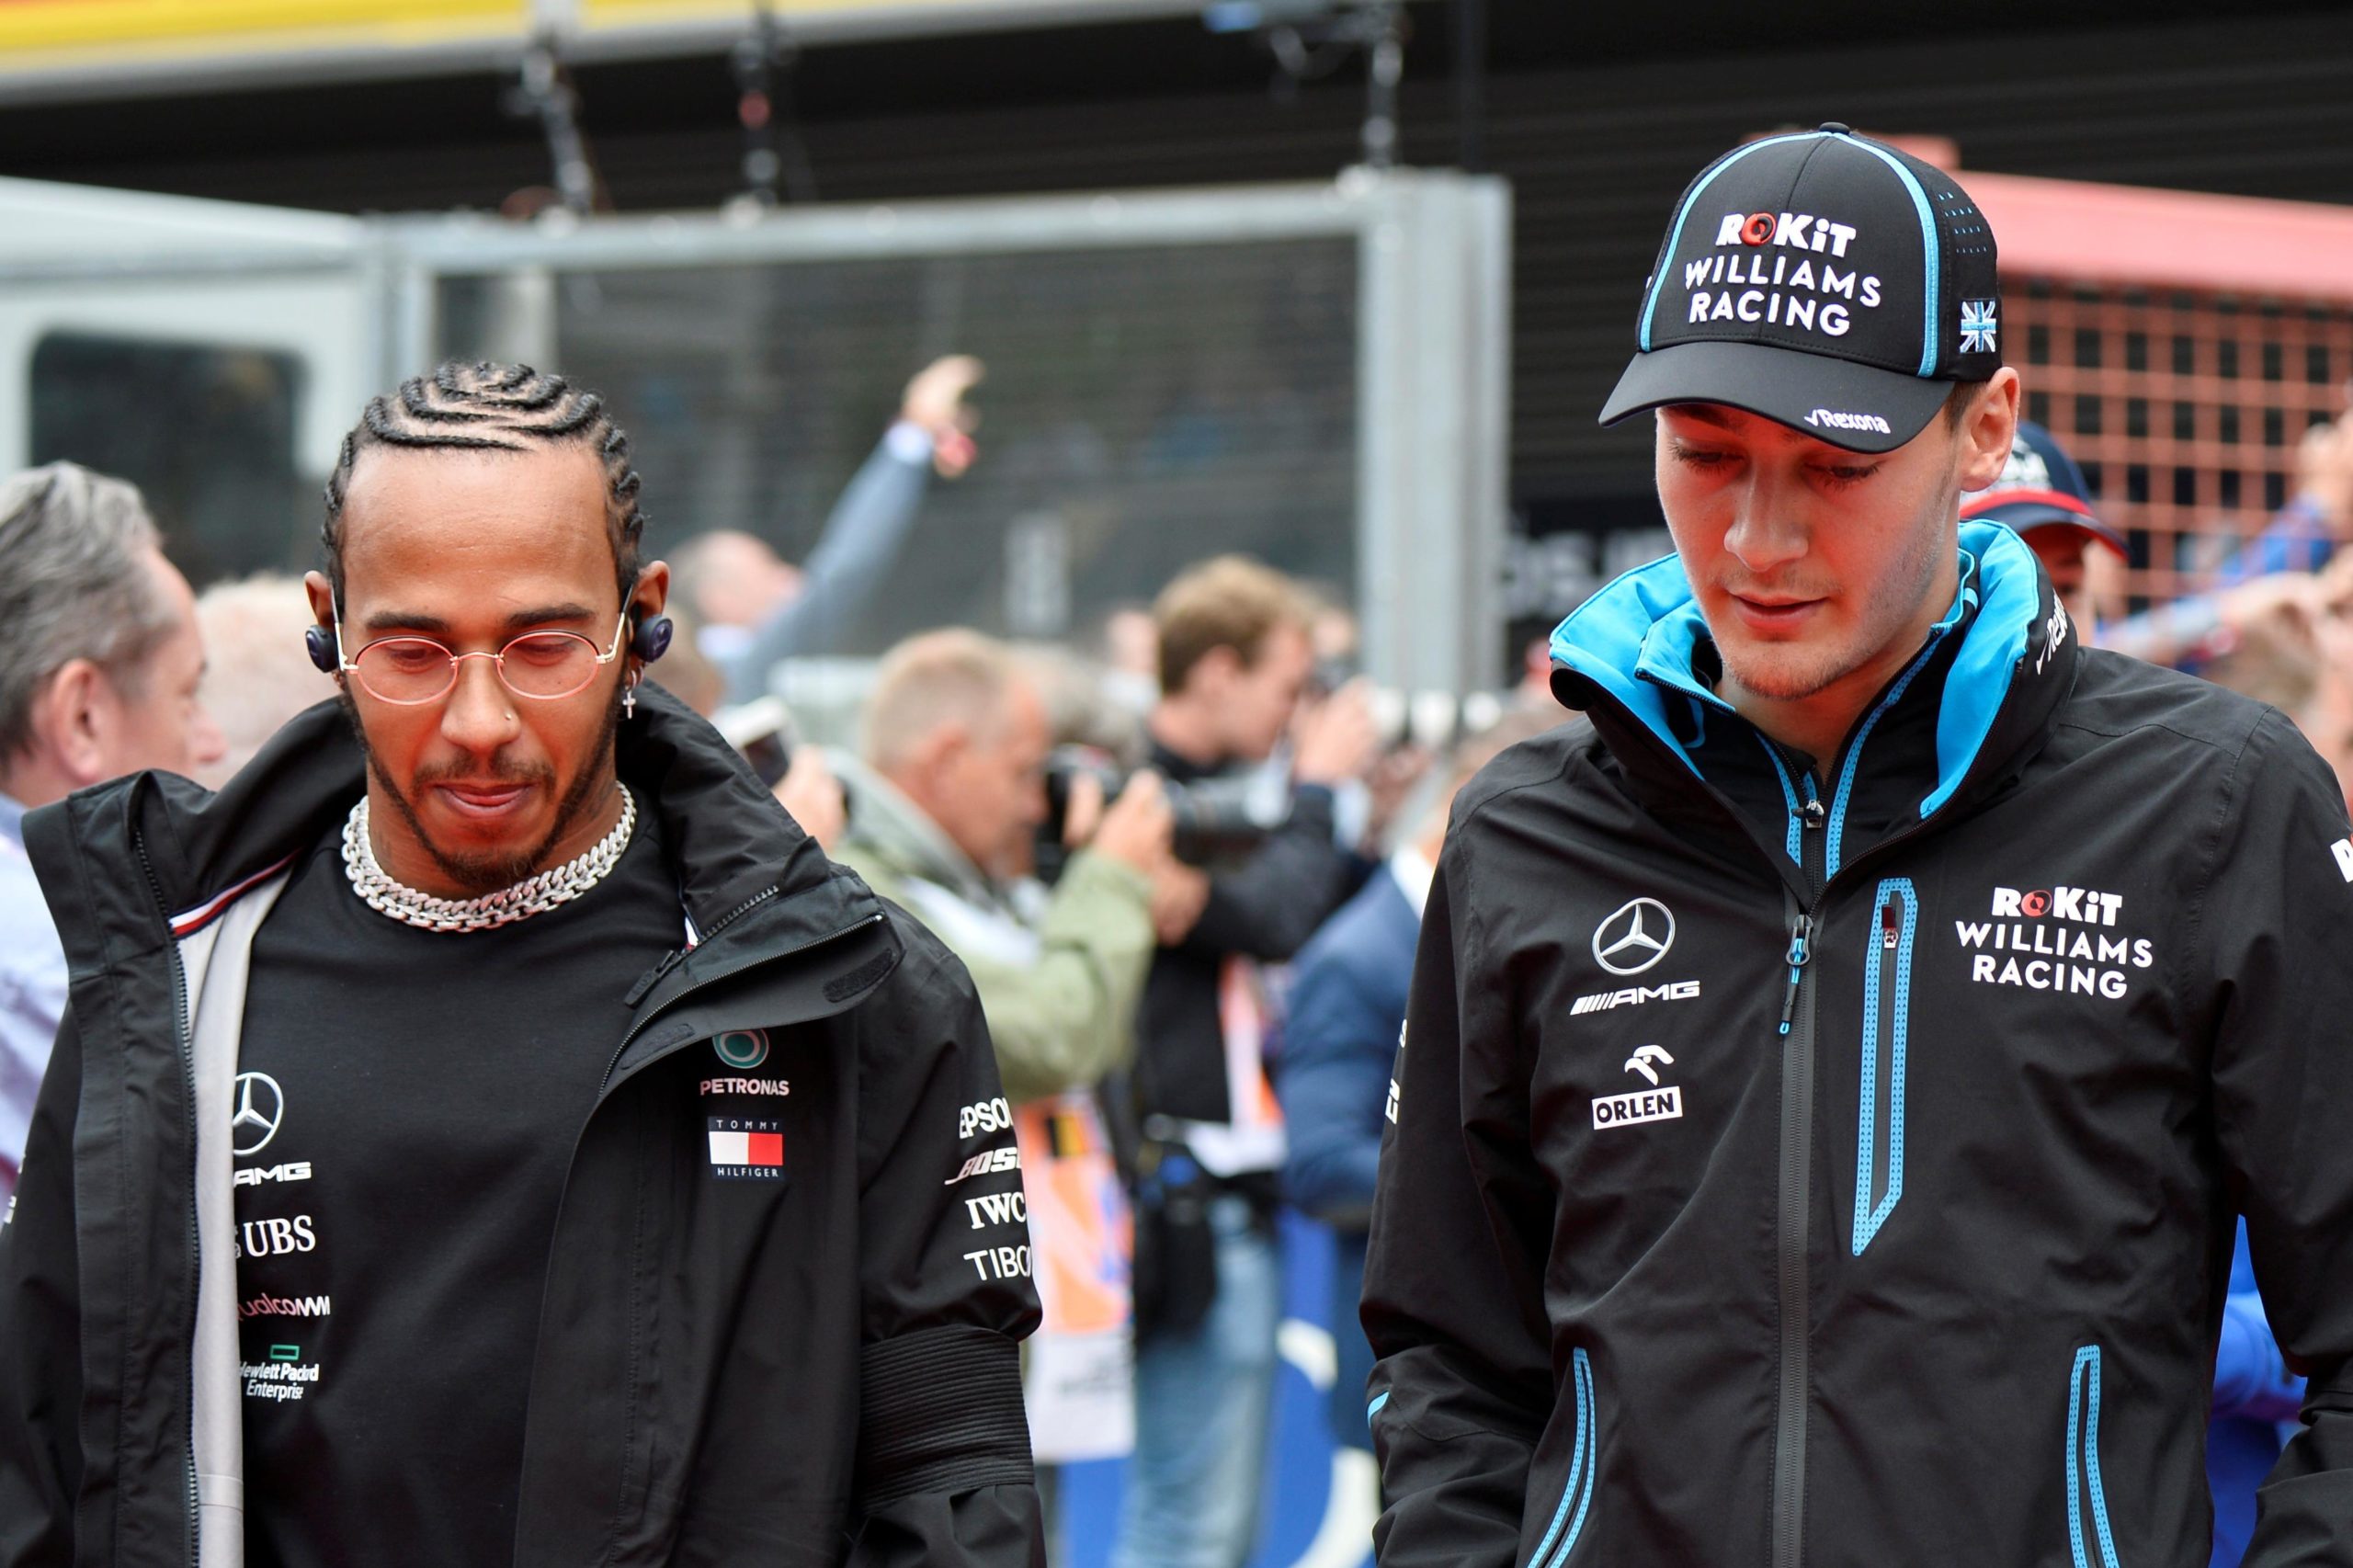 Russell is very close to Hamilton's early career level - Williams' head of vehicle performance